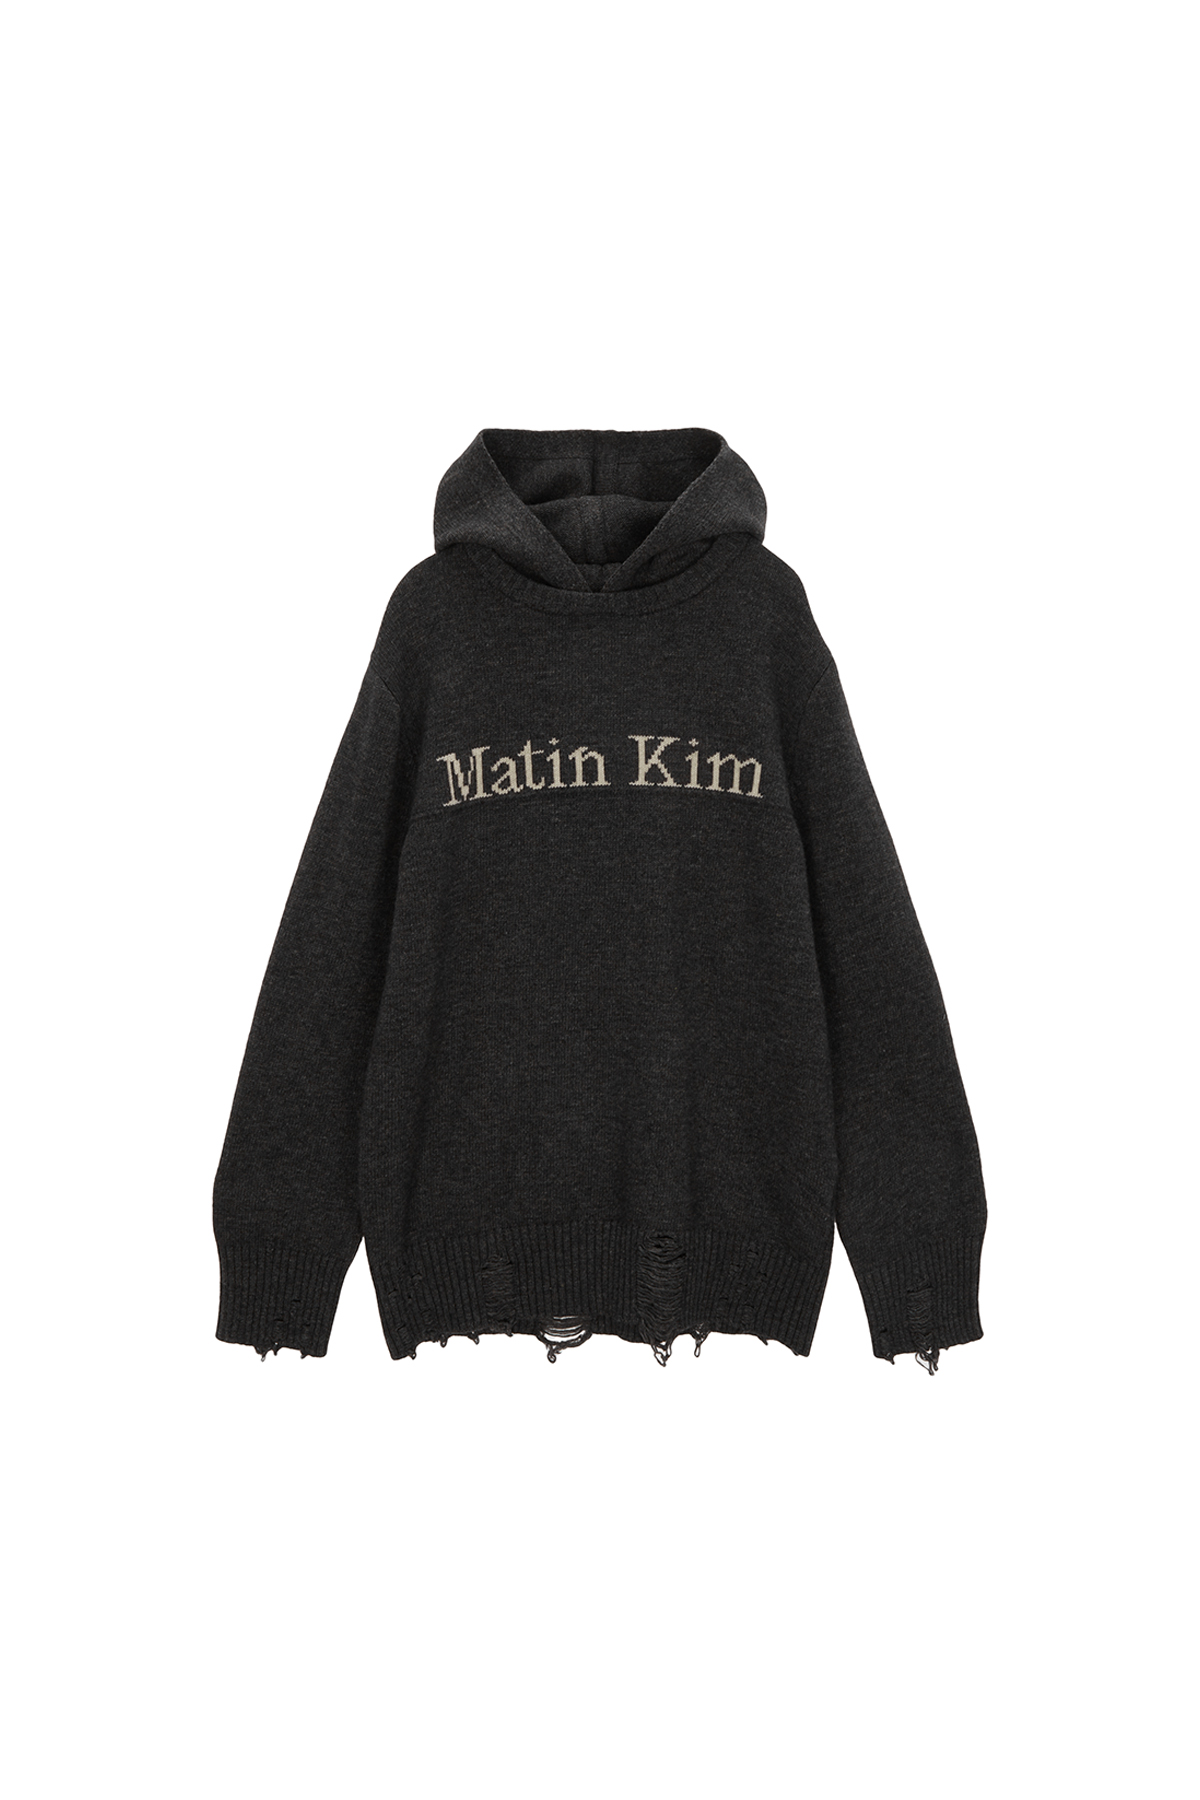 DAMAGE LOGO KNIT HOODIE IN CHARCOAL